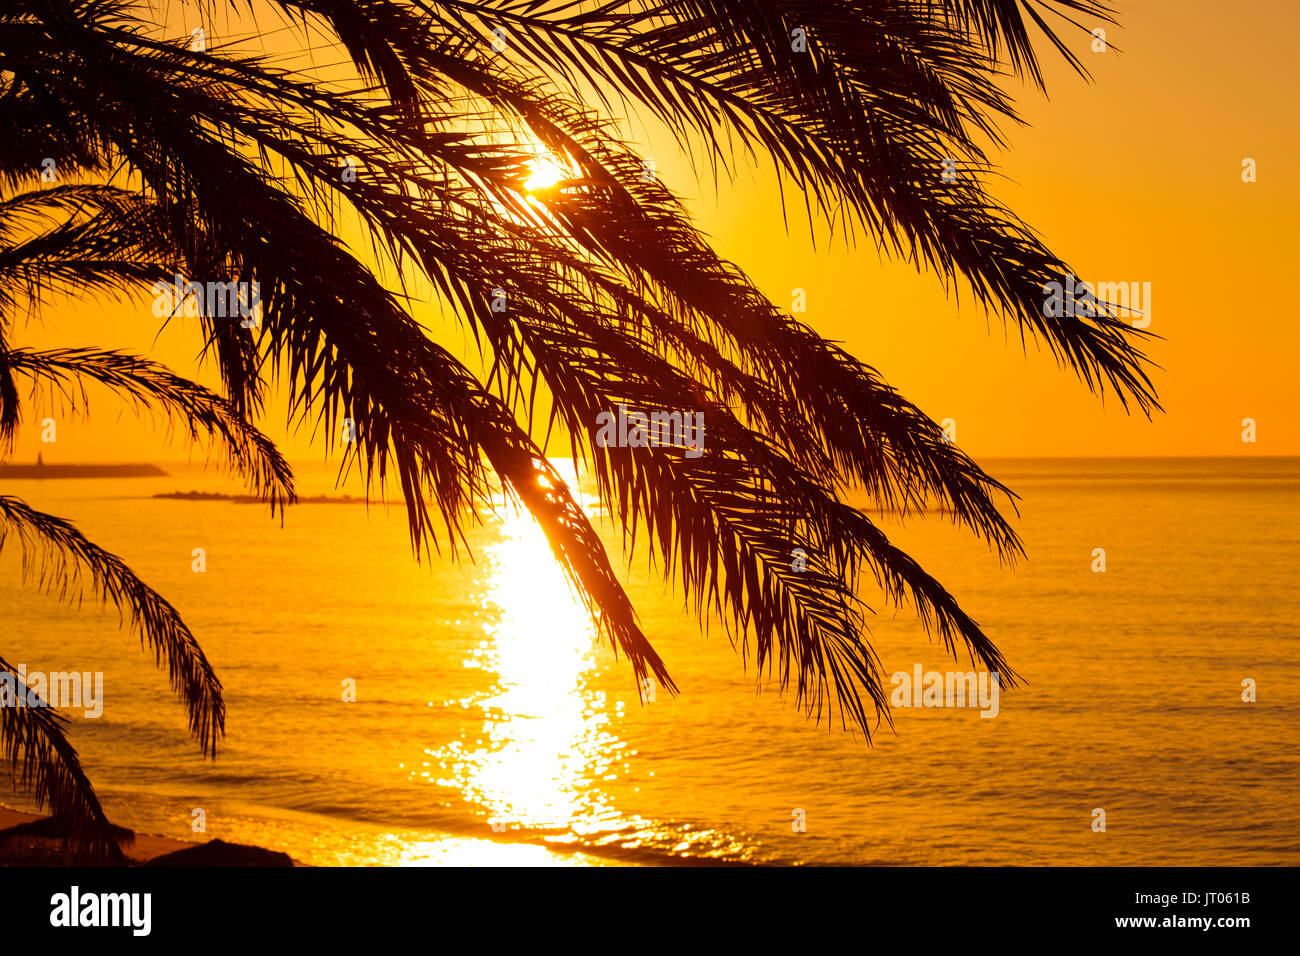 Palm trees and person running, beach at sunrise. Benalmadena. Malaga province Costa del Sol. Andalusia Southern Spain, Europe Stock Photo